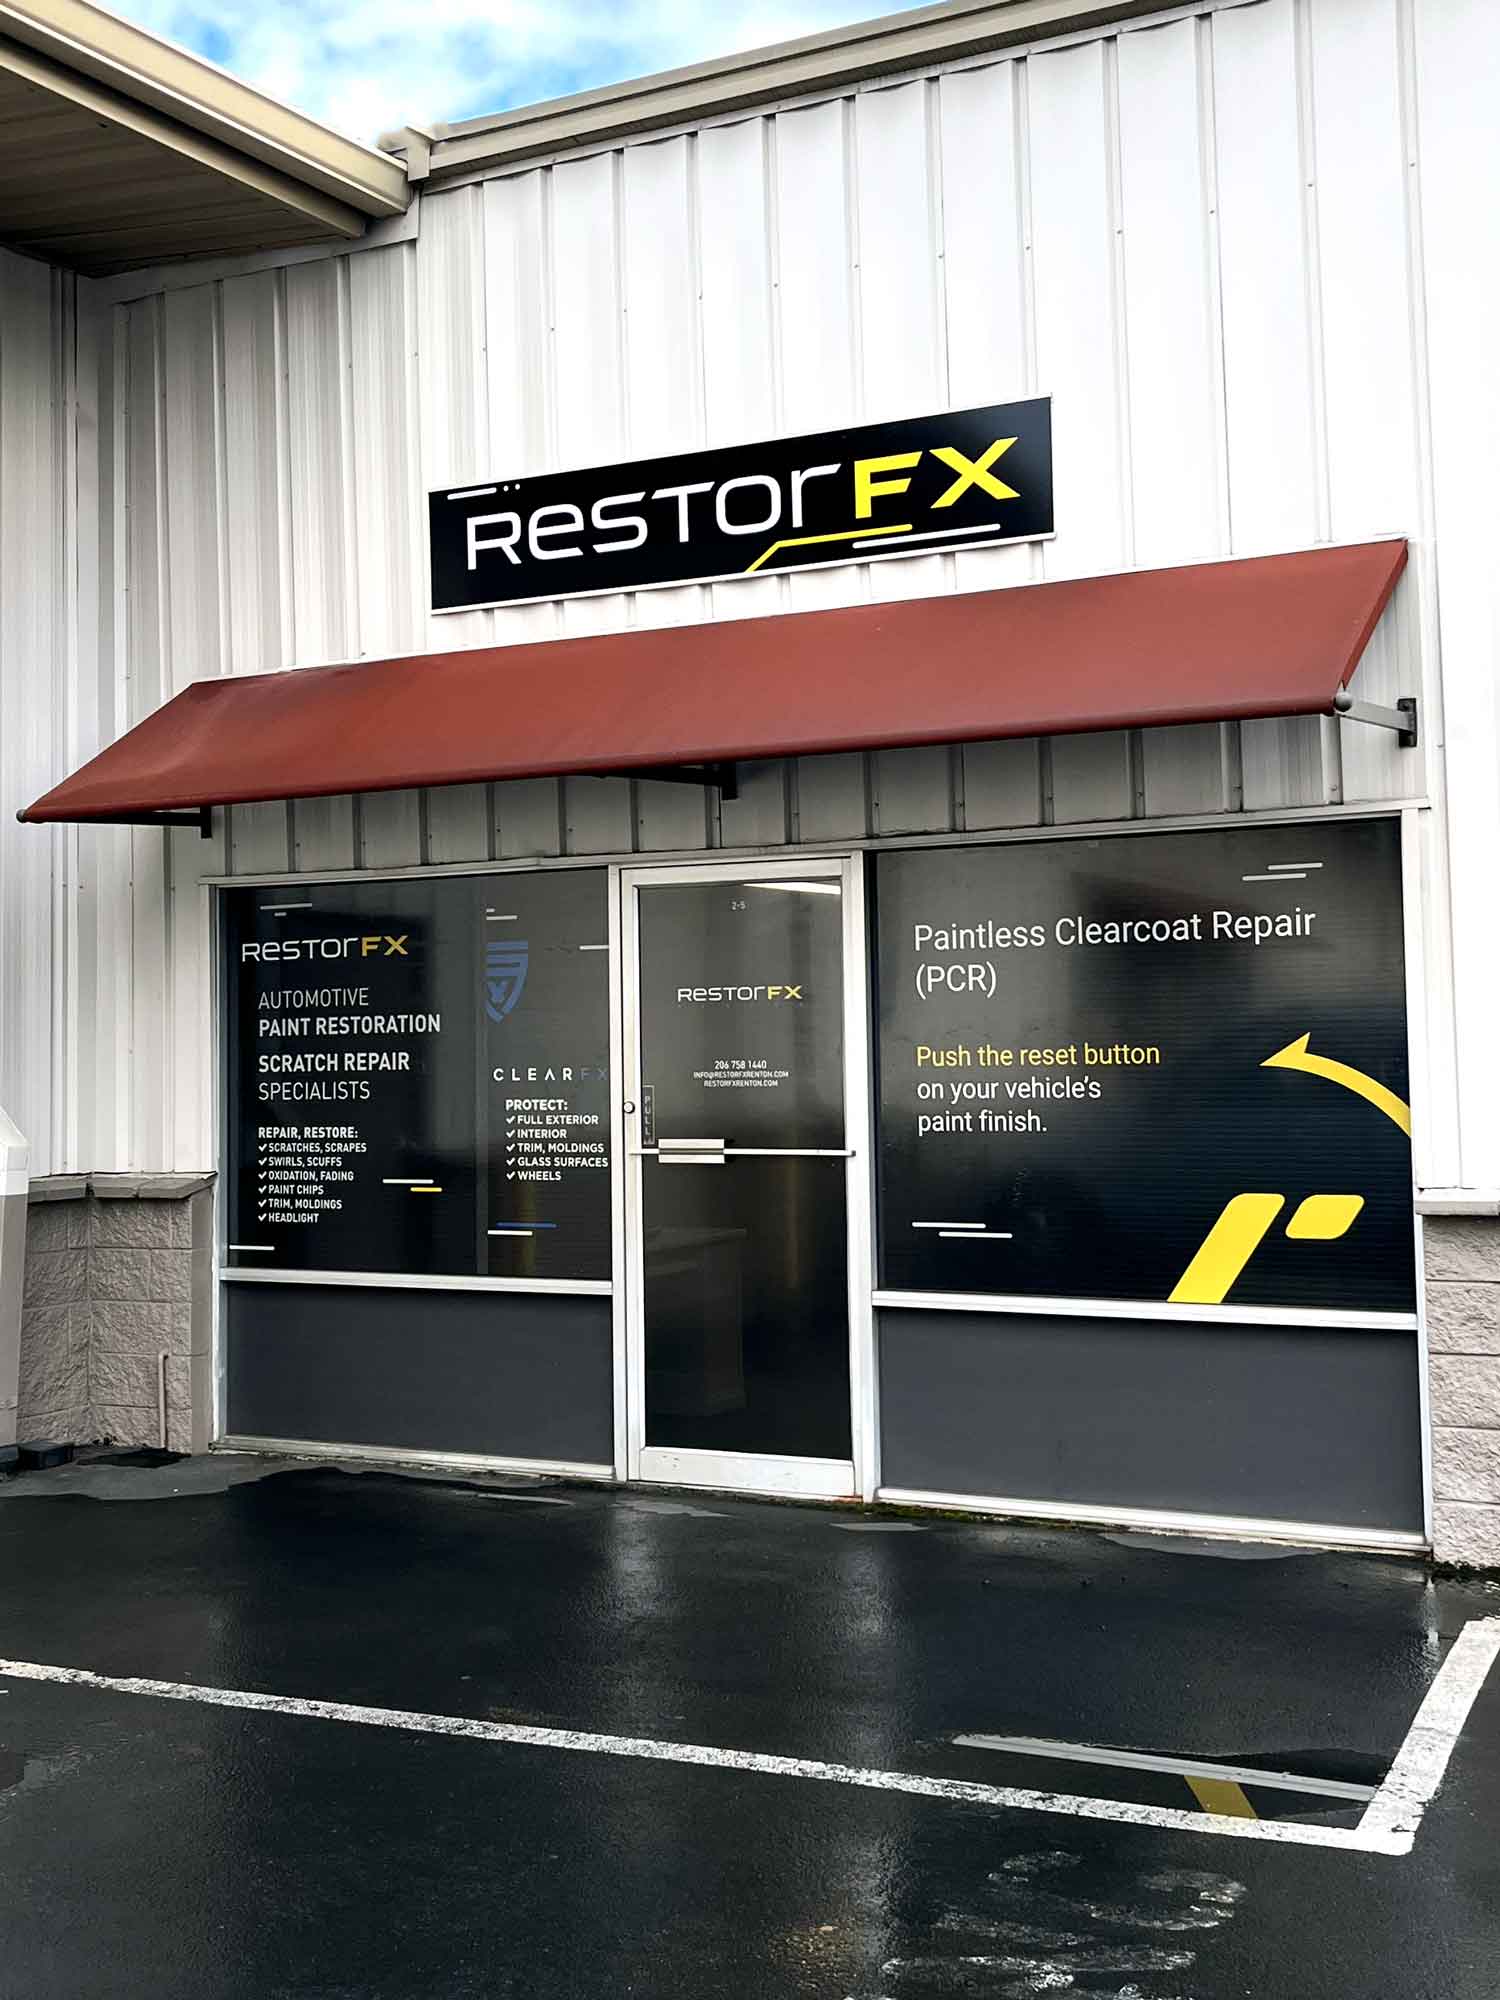 RestorFX Renton storefront unit with branded windows, door and a sign mounted on the wall